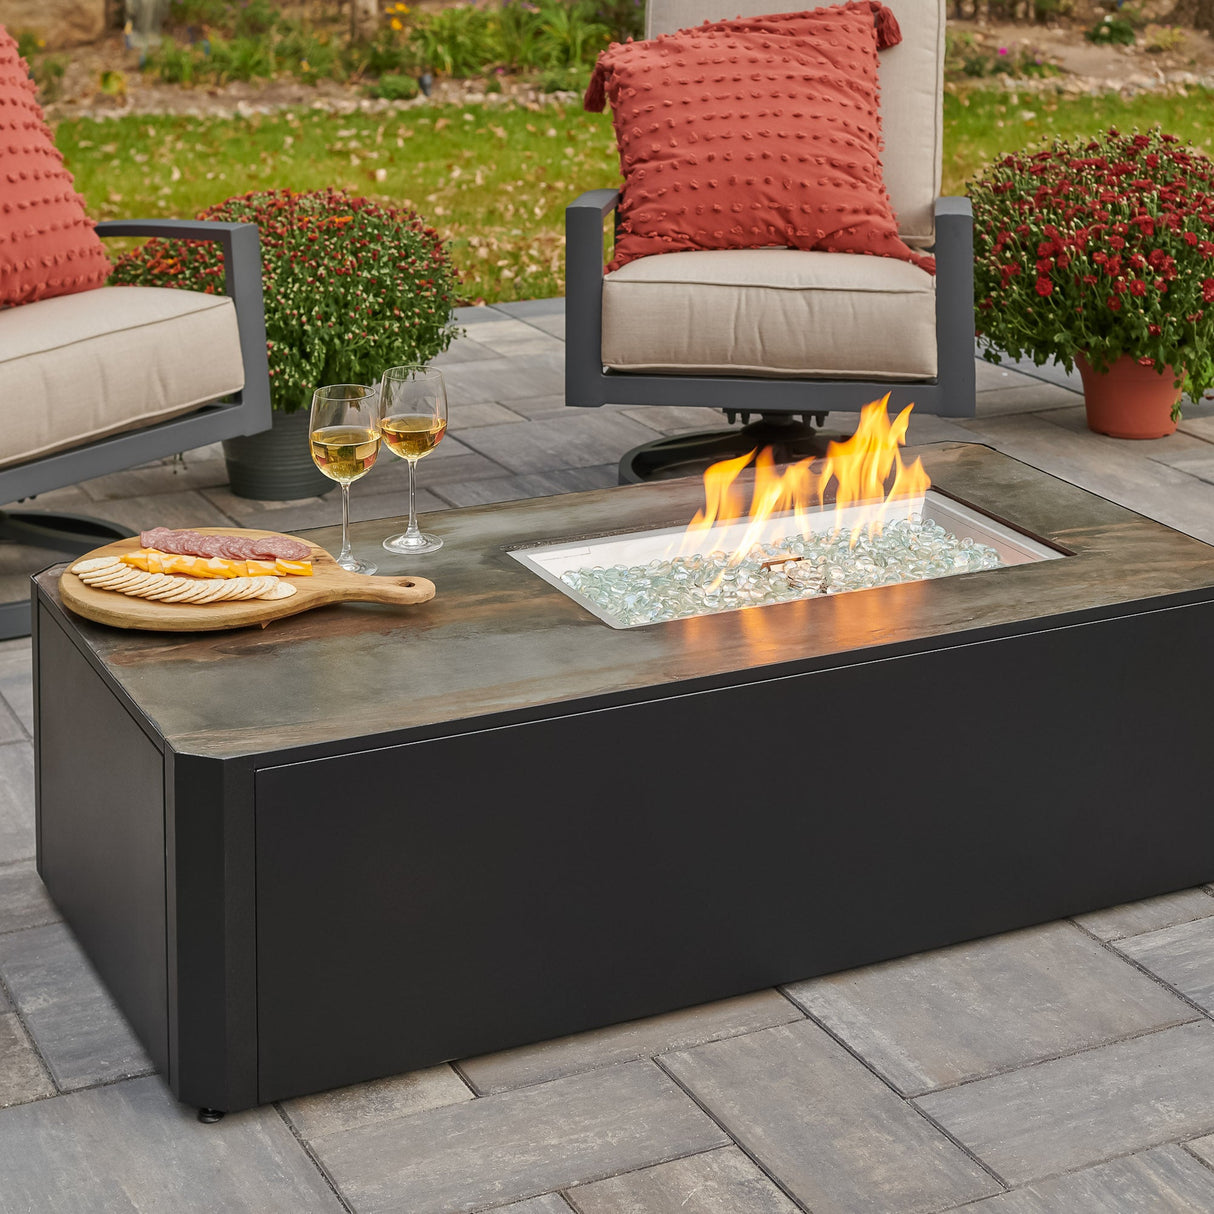 The Kinney Rectangular Gas Fire Pit Table being used as a table with food and drink outside